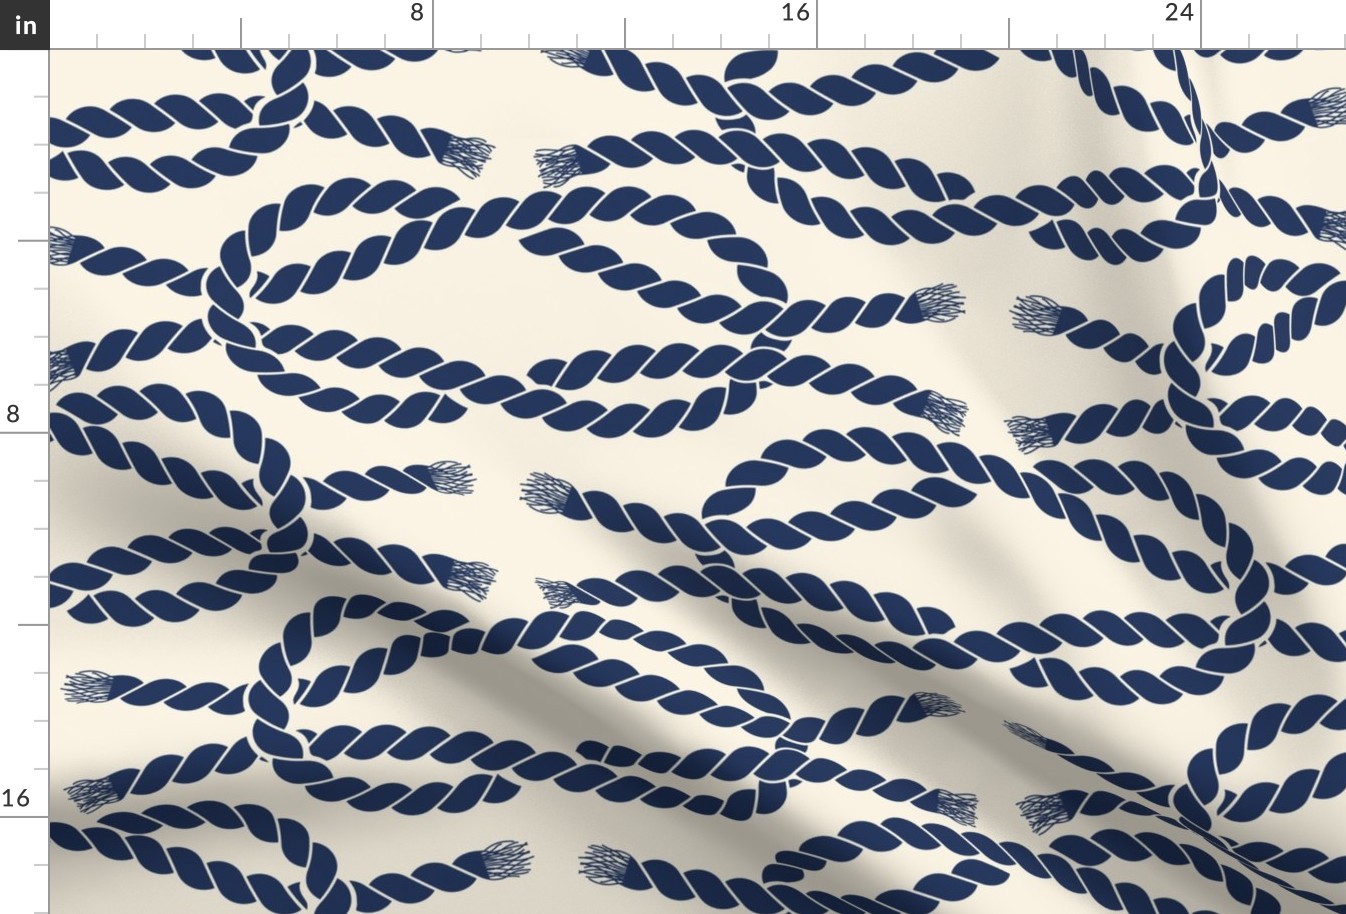 Nautical Square Knot - Rope - Coastal Chic Collection - Cassic Navy on Ivory BG